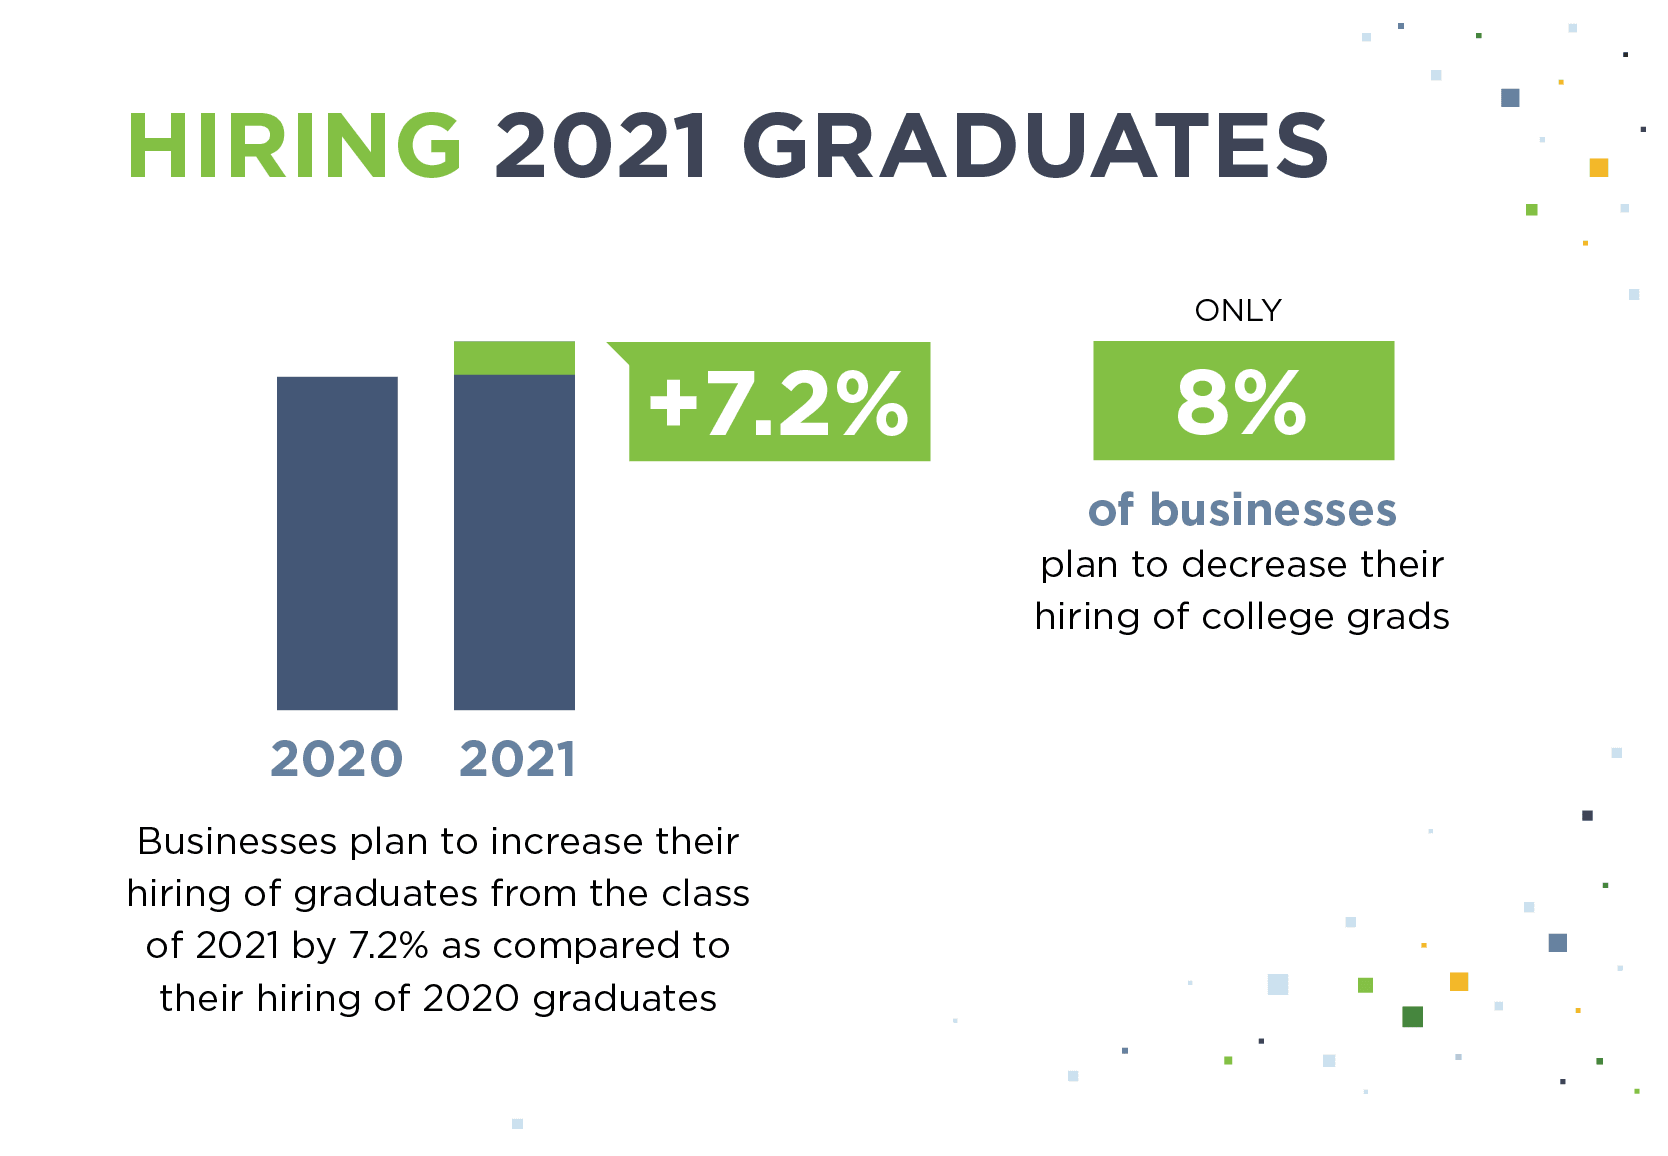 Data shows businesses are planning to increase hiring of college grads.